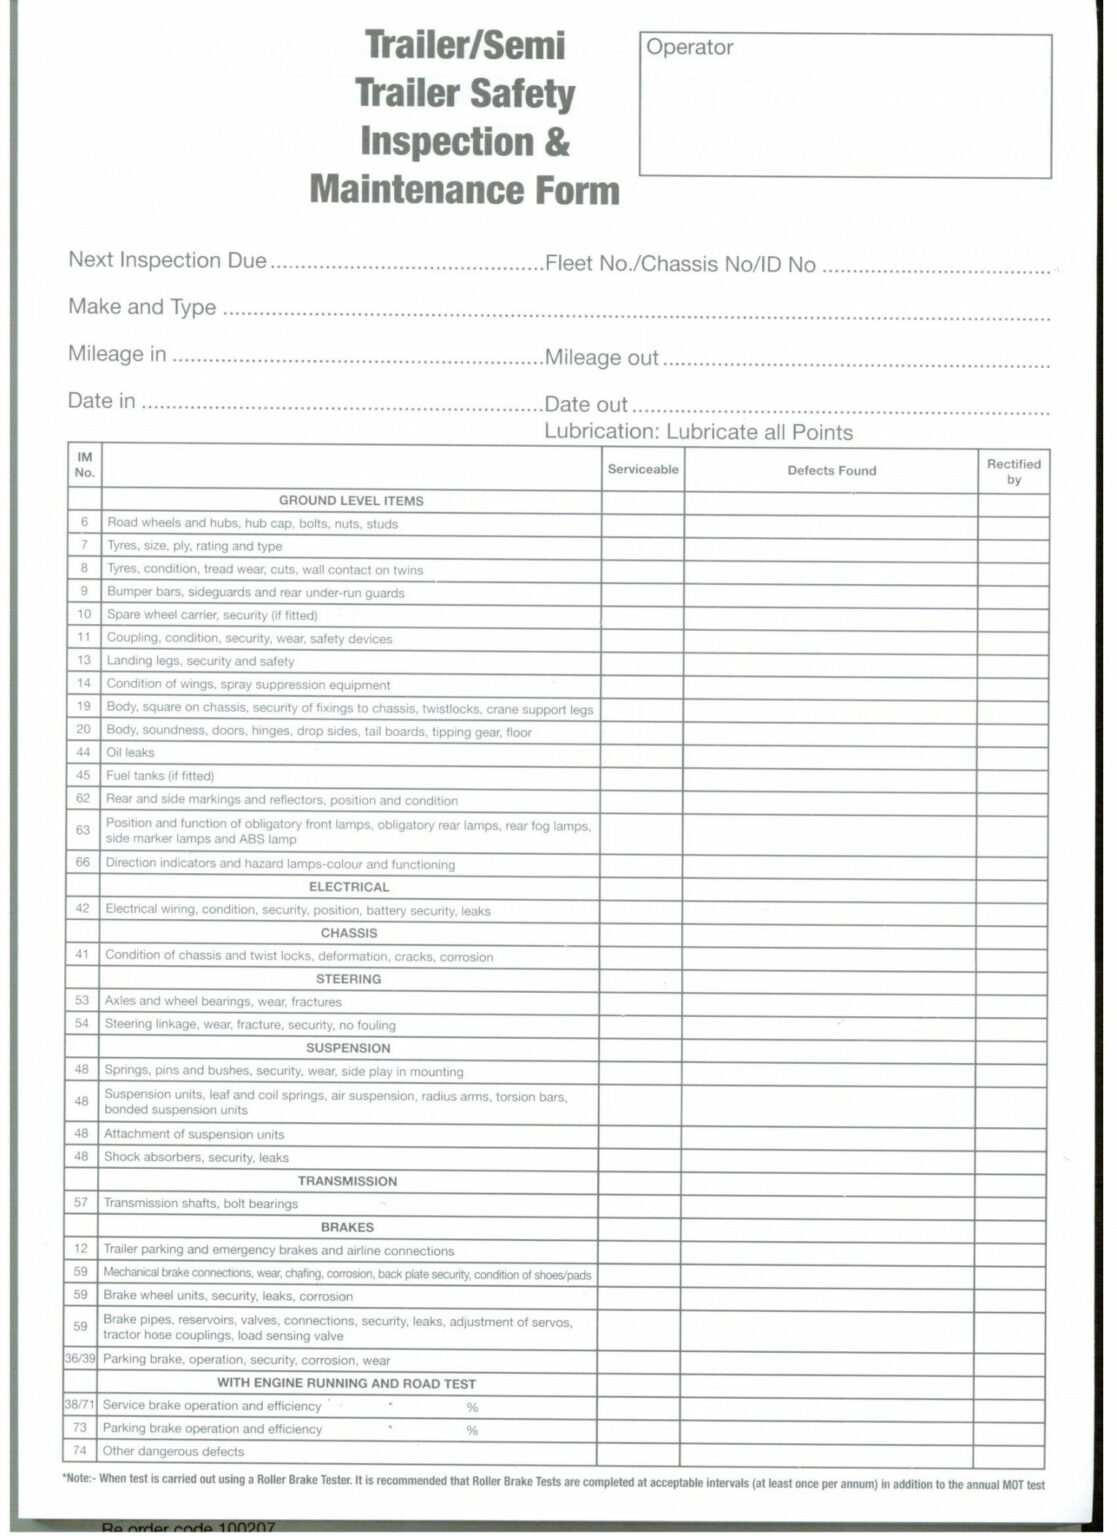 printable-trailer-and-semi-trailers-inspection-and-rectification-report